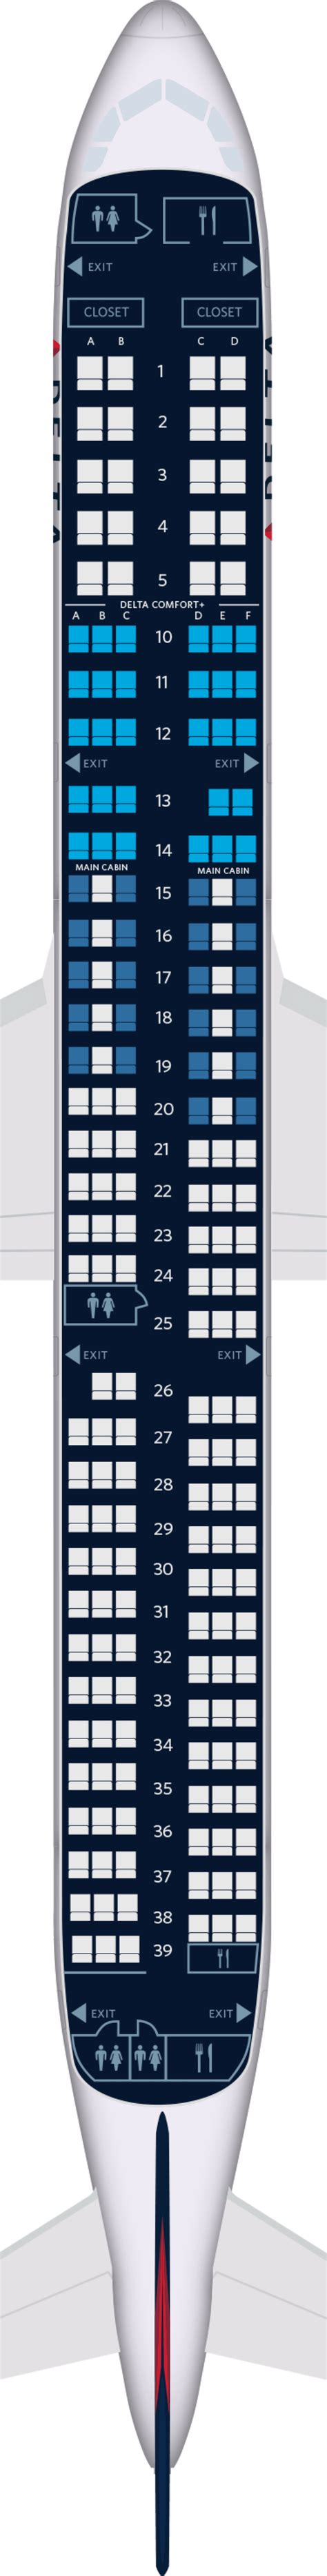 The Delta Airlines Airbus A321 features 192 seats in a 4 cabin configuration. Economy has 143 seats in a 3-3 config; Premium economy has 29 seats in a 3-3 config; Business class has 12 seats; First class has 20 seats in a 2 …. 